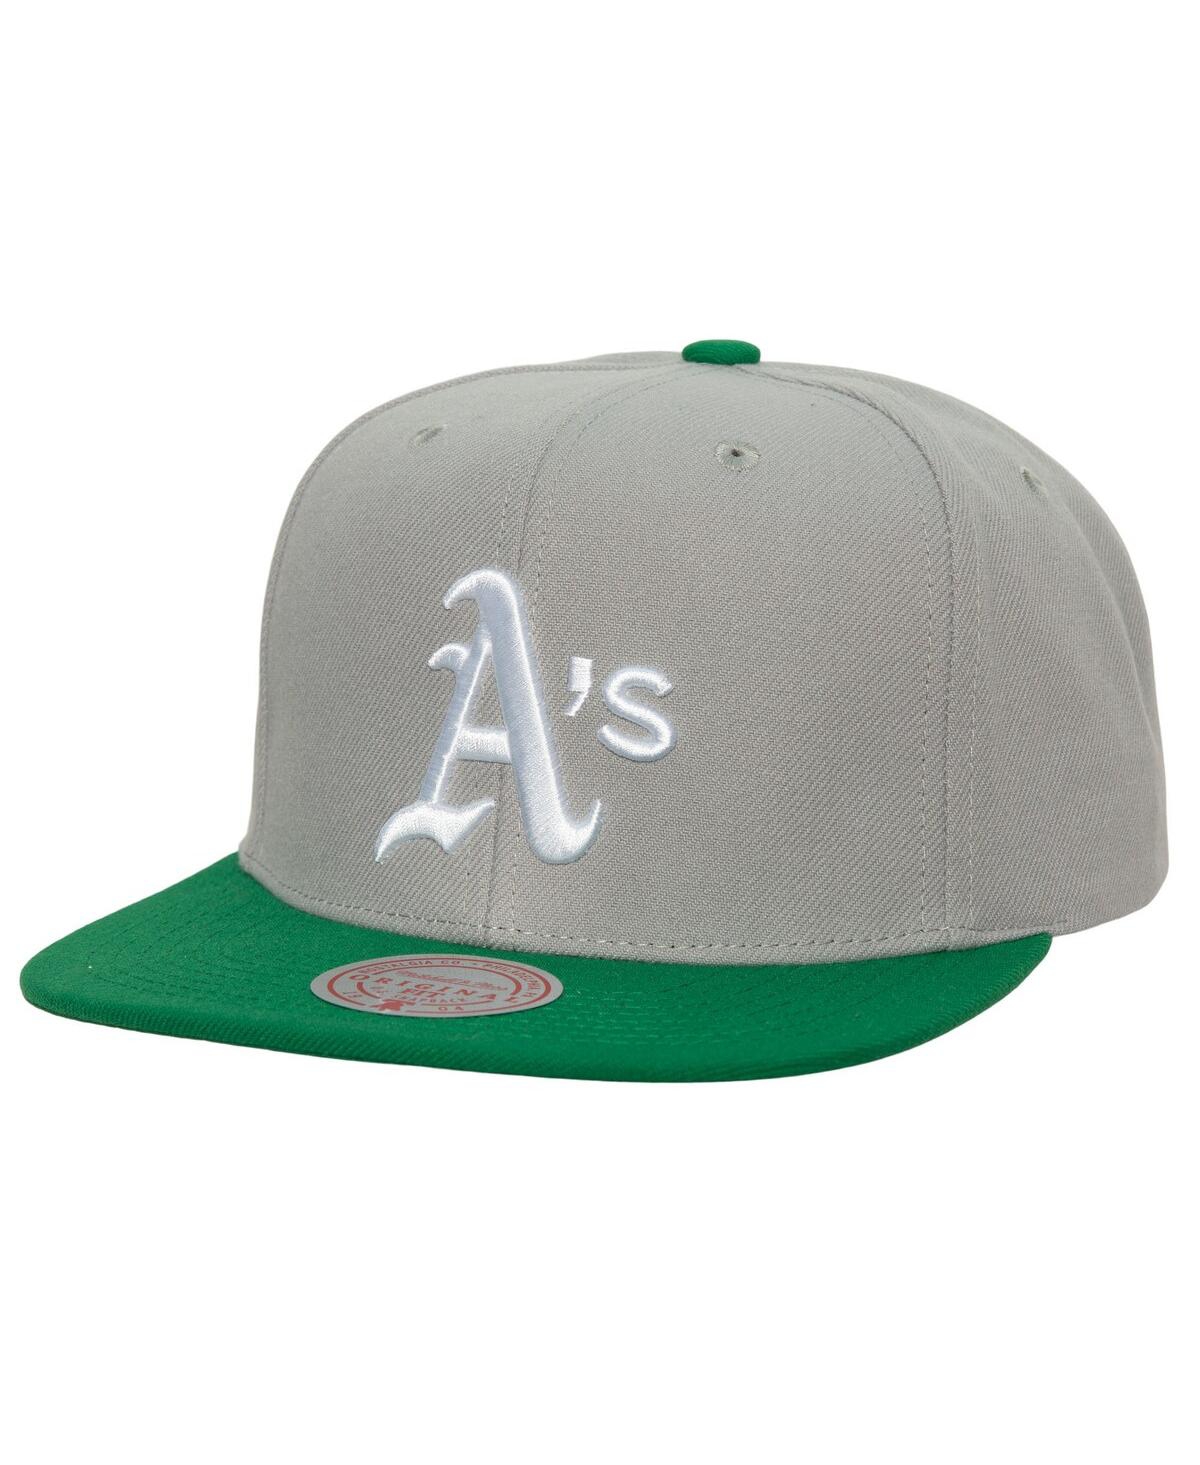 Shop Mitchell & Ness Men's  Gray Oakland Athletics Cooperstown Collection Away Snapback Hat